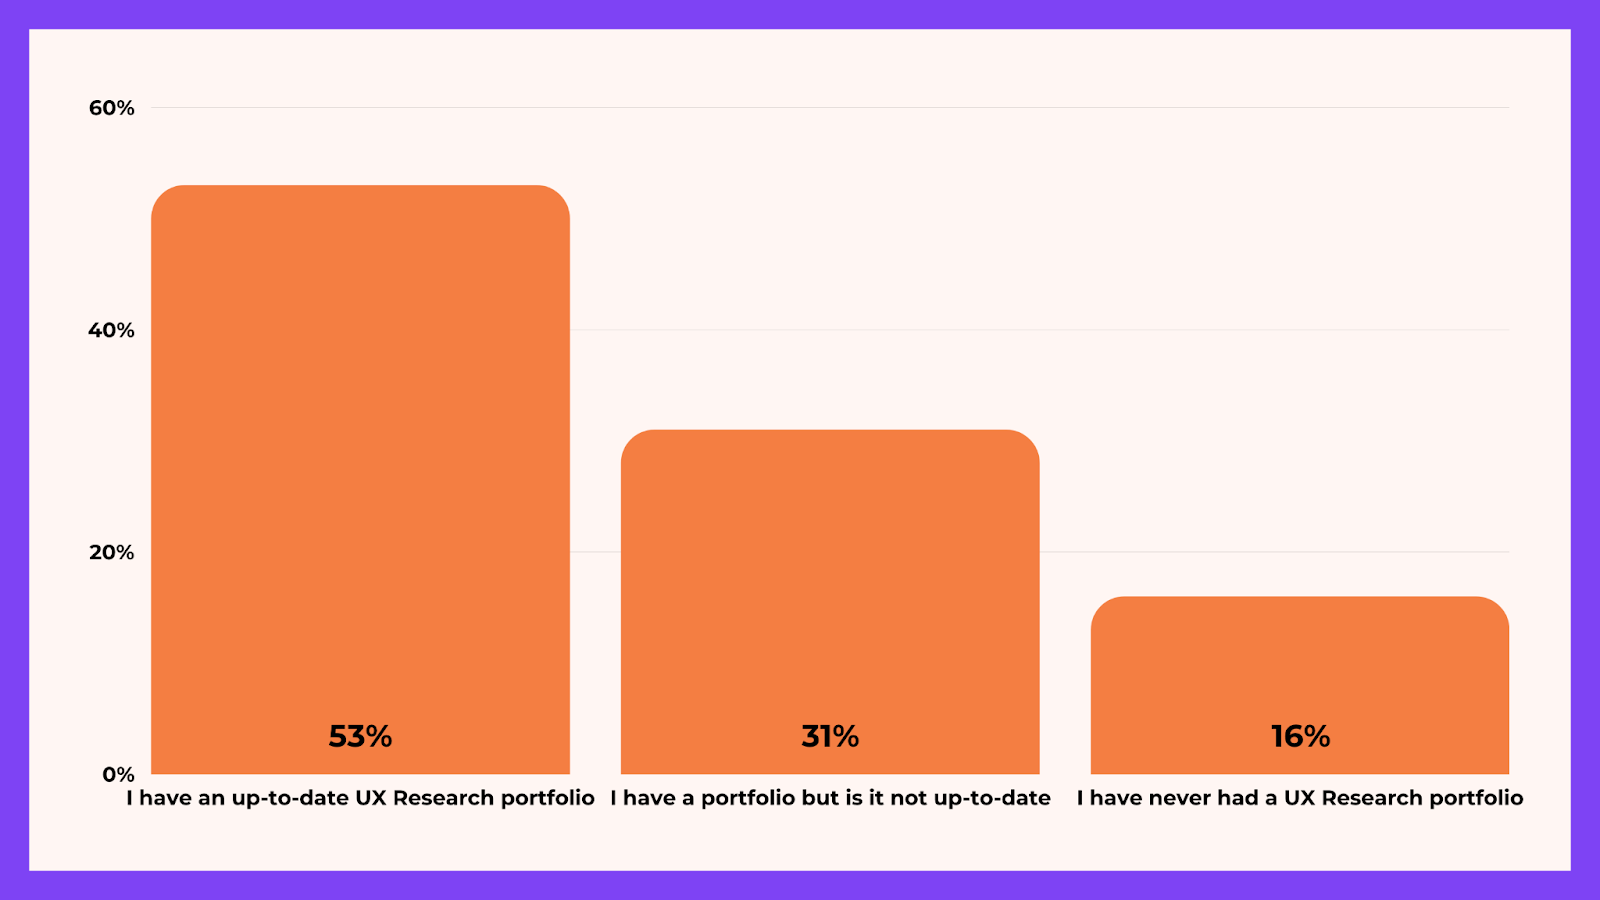  Bar charts representing proportions of respondents who have up-to-date portfolios versus an out of date portfolio, or none; described in the text.